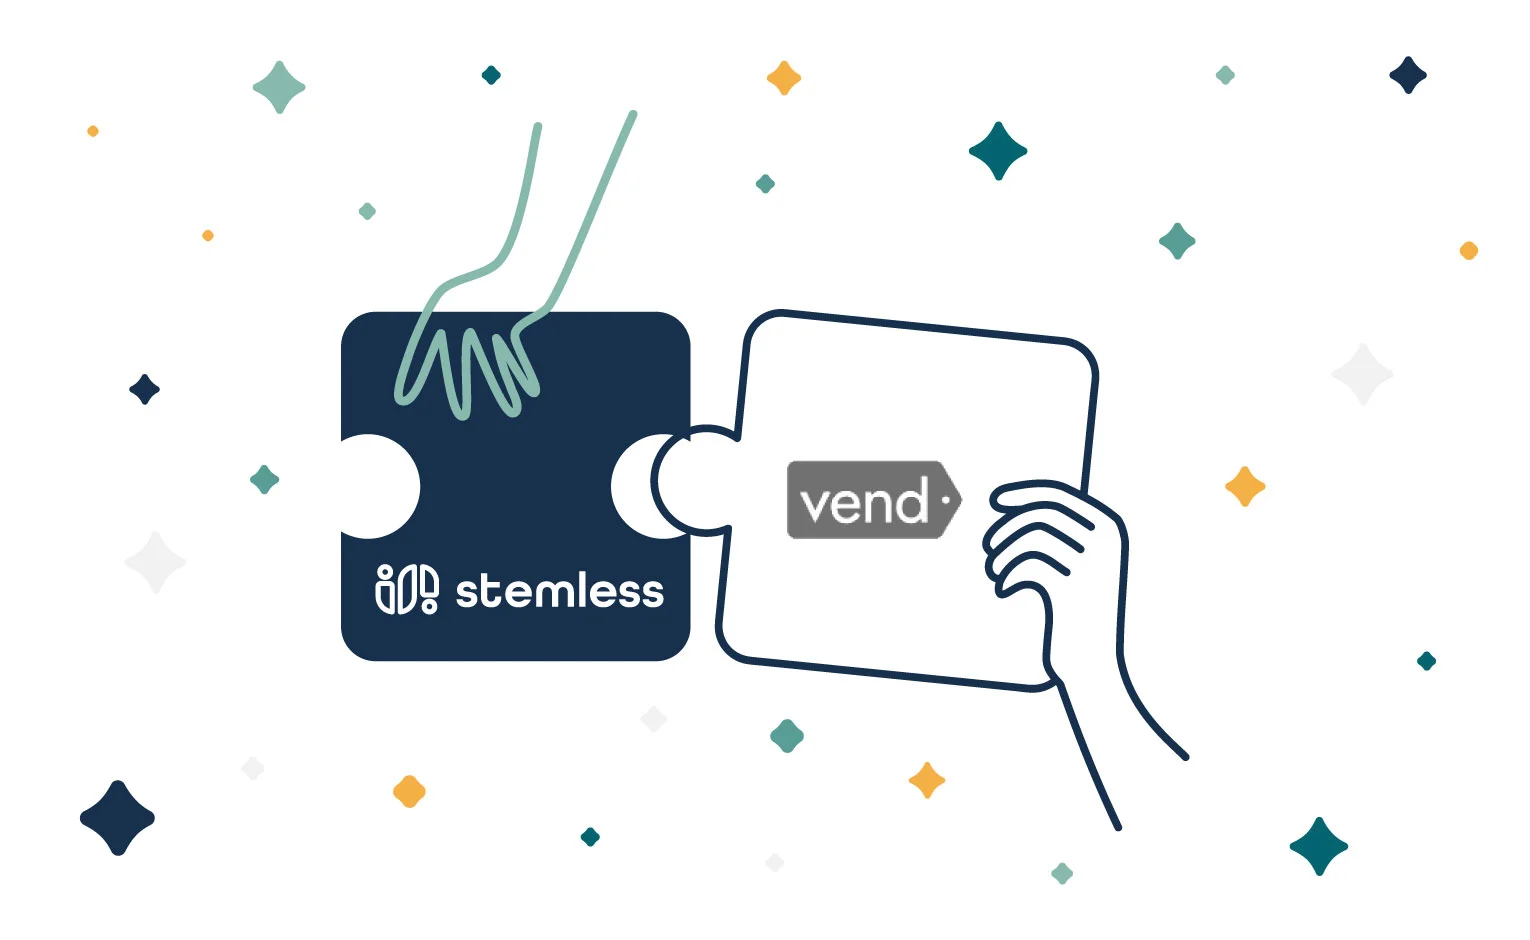 Improve Your Customer Experience with Stemless & Vend POS